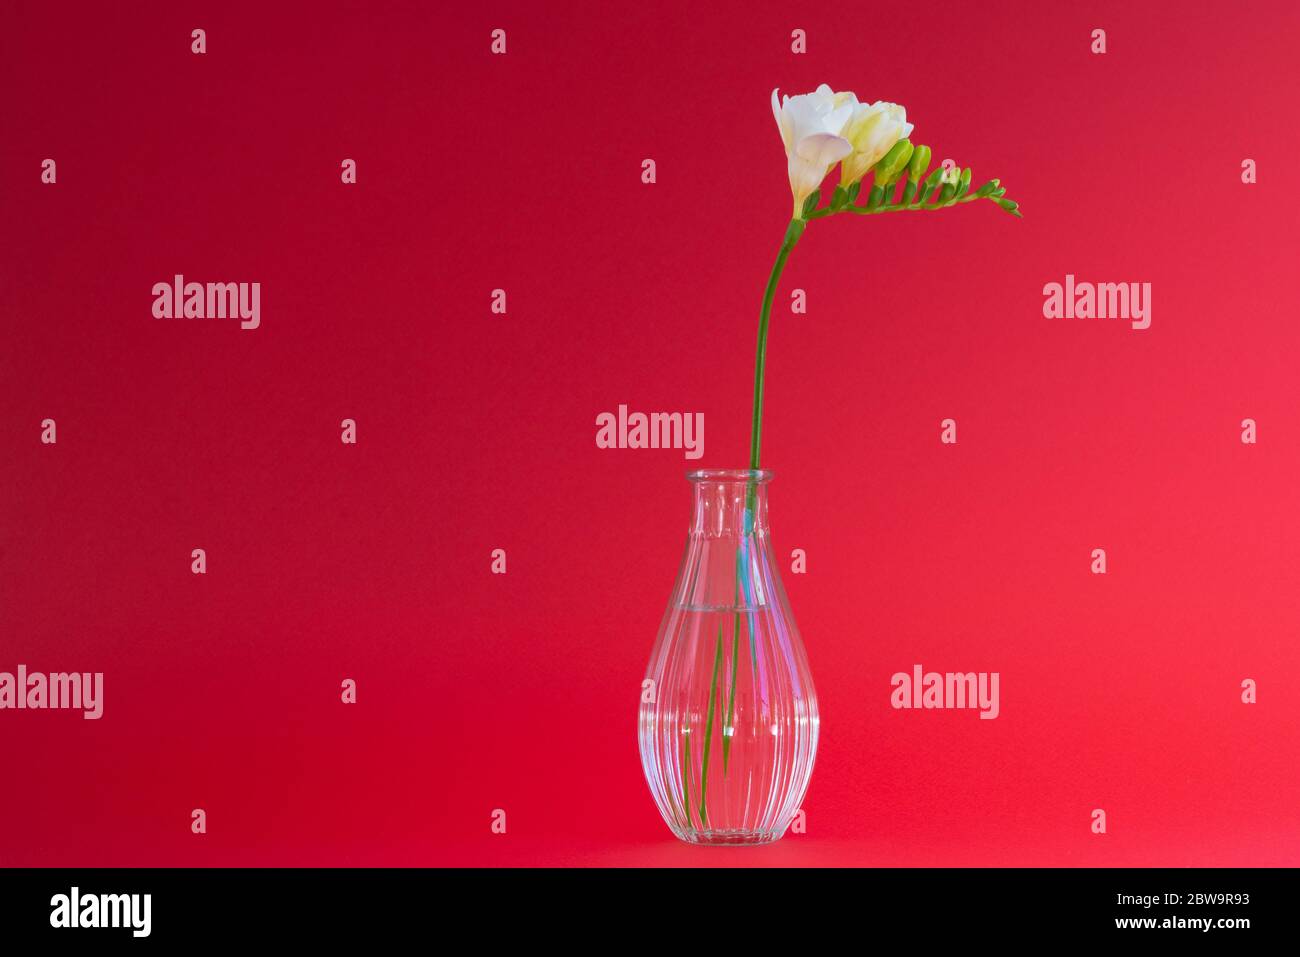 Single white freesia flower head  in a small transparent glass vase set on on a red background using mostly natural light Stock Photo